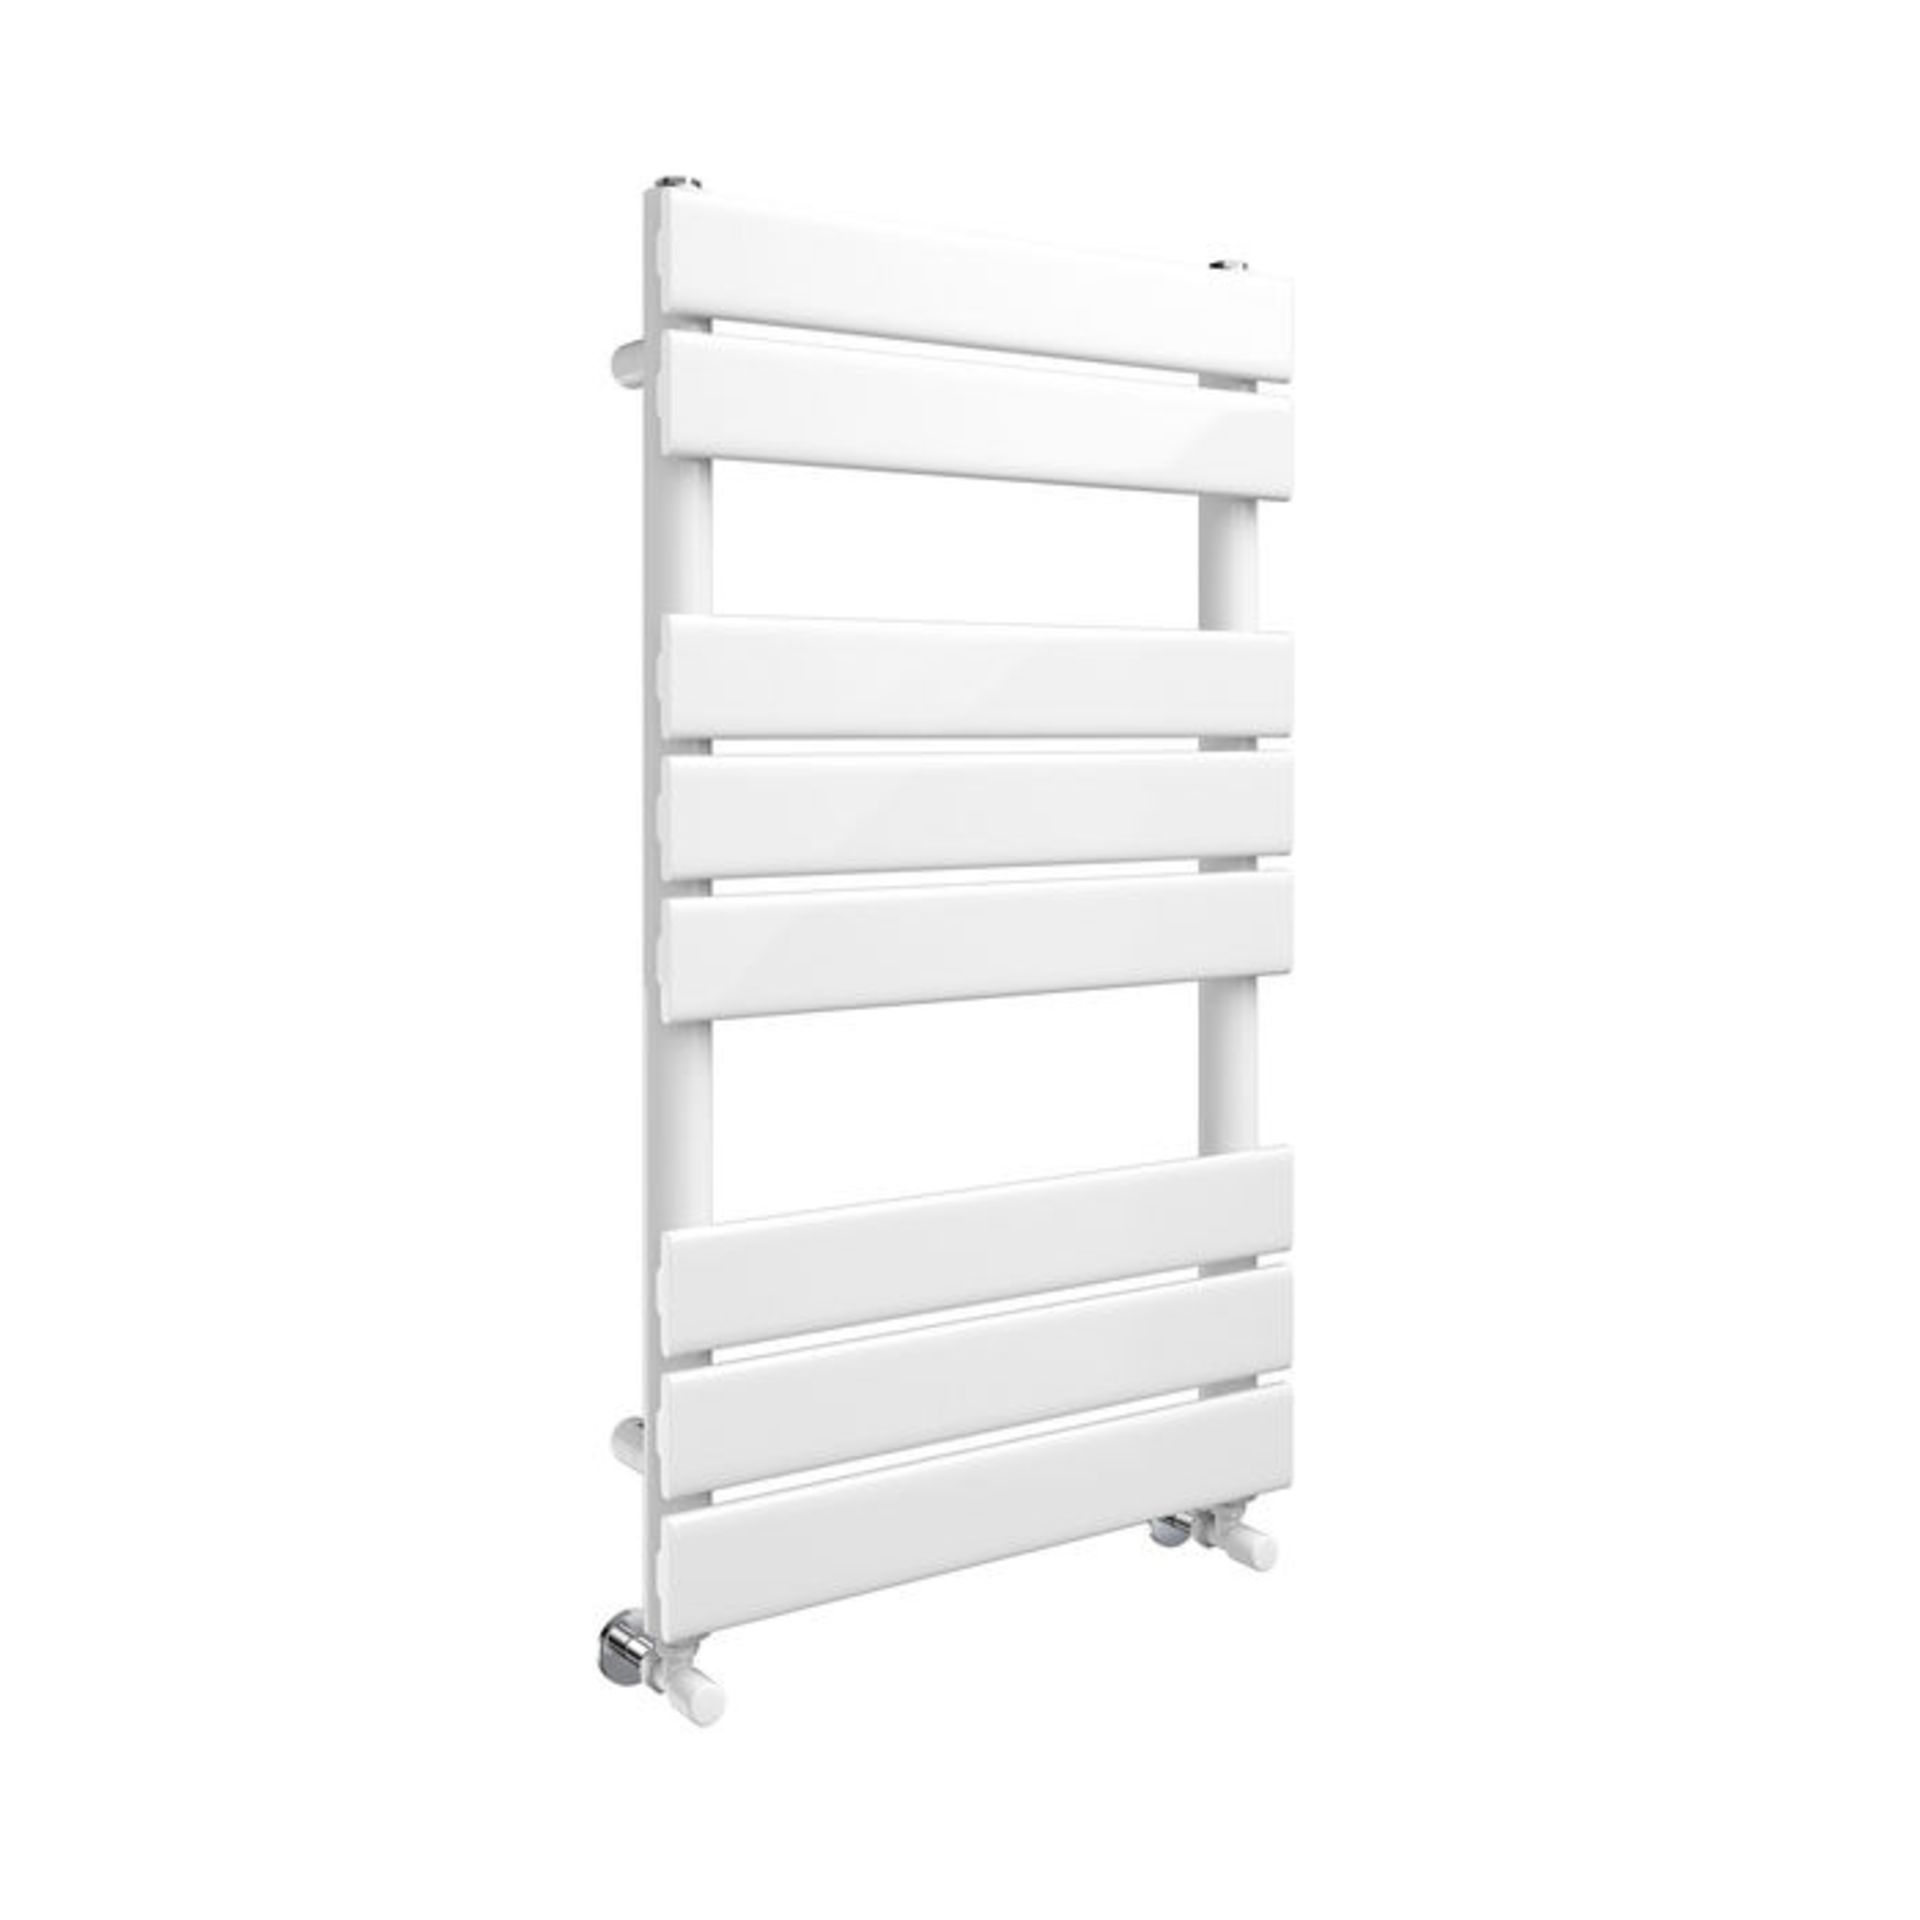 (PT50) 800x450mm White Flat Panel Ladder Towel Radiator. Made from low carbon steel with a high - Bild 3 aus 3